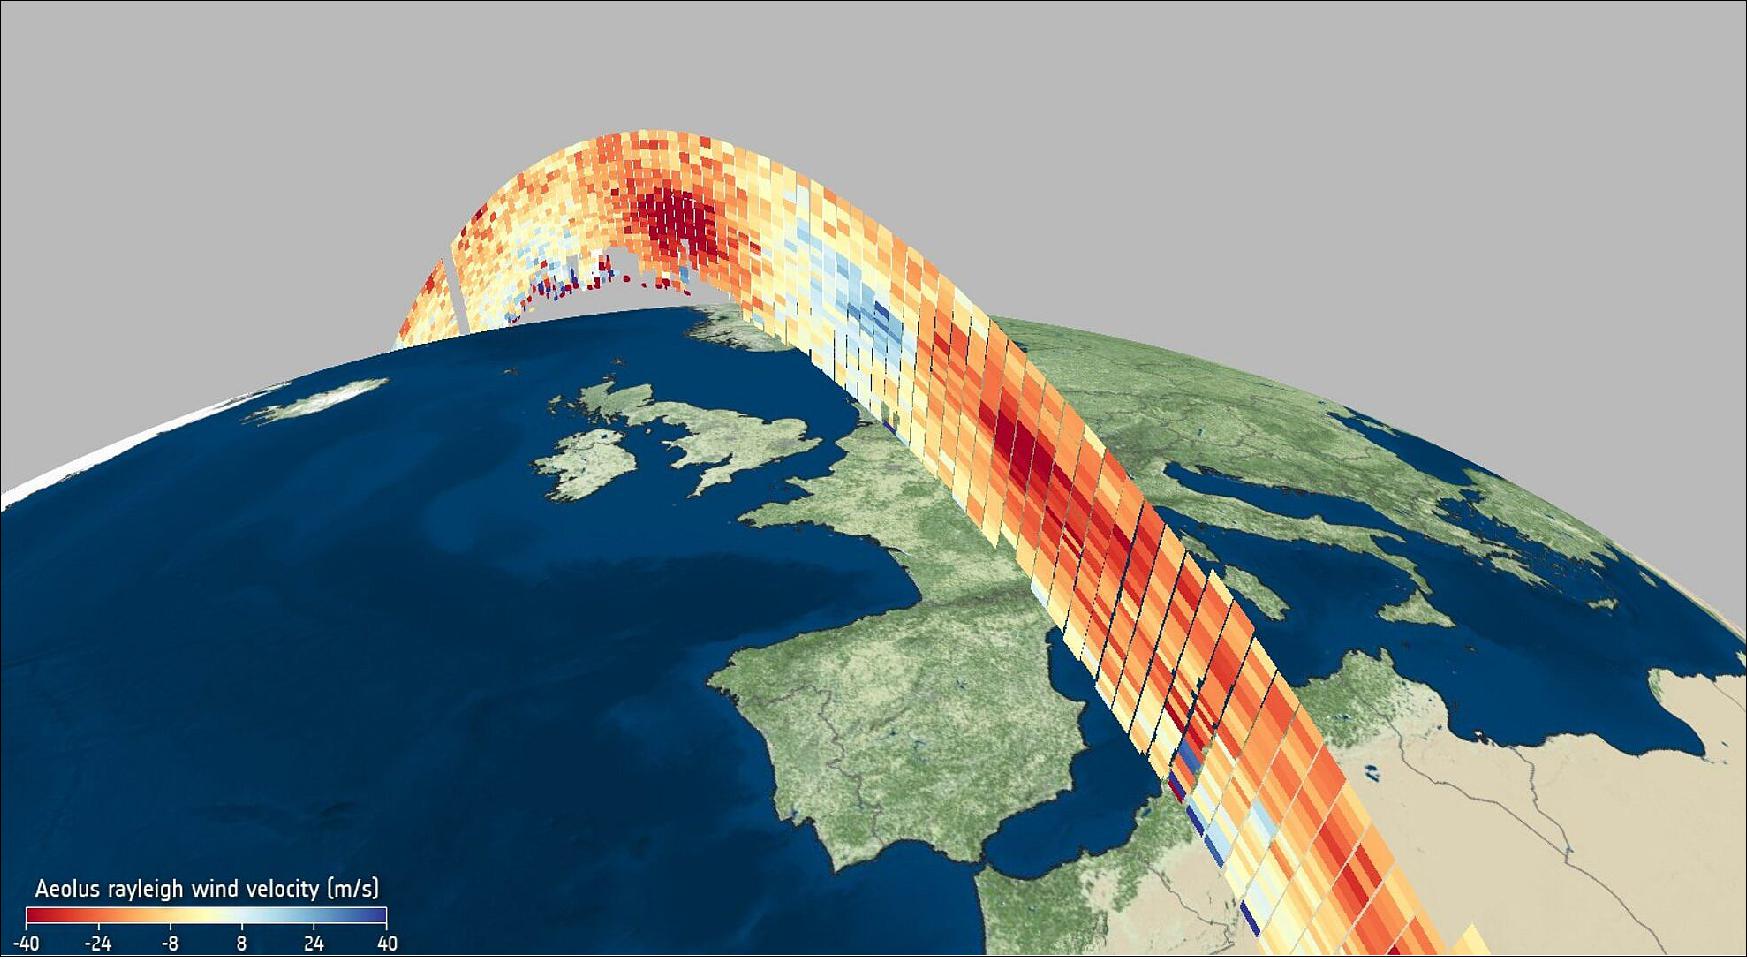 Figure 21: Wind profile from Aeolus 6 May 2020. Carrying breakthrough laser technology, the Aeolus satellite – an ESA Earth Explorer mission – was launched in August 2018. It is the first satellite mission to profile Earth's winds directly from space. Its data are not only being used to understand how wind, pressure, temperature and humidity are interlinked to contribute to climate research, but are also now being used in near-realtime for weather forecasting. This image is an example of Level-2B Rayleigh wind velocity in m/s second over Europe on 6 May 2020 at 06:00 UTC (image credit: ESA/VirES)